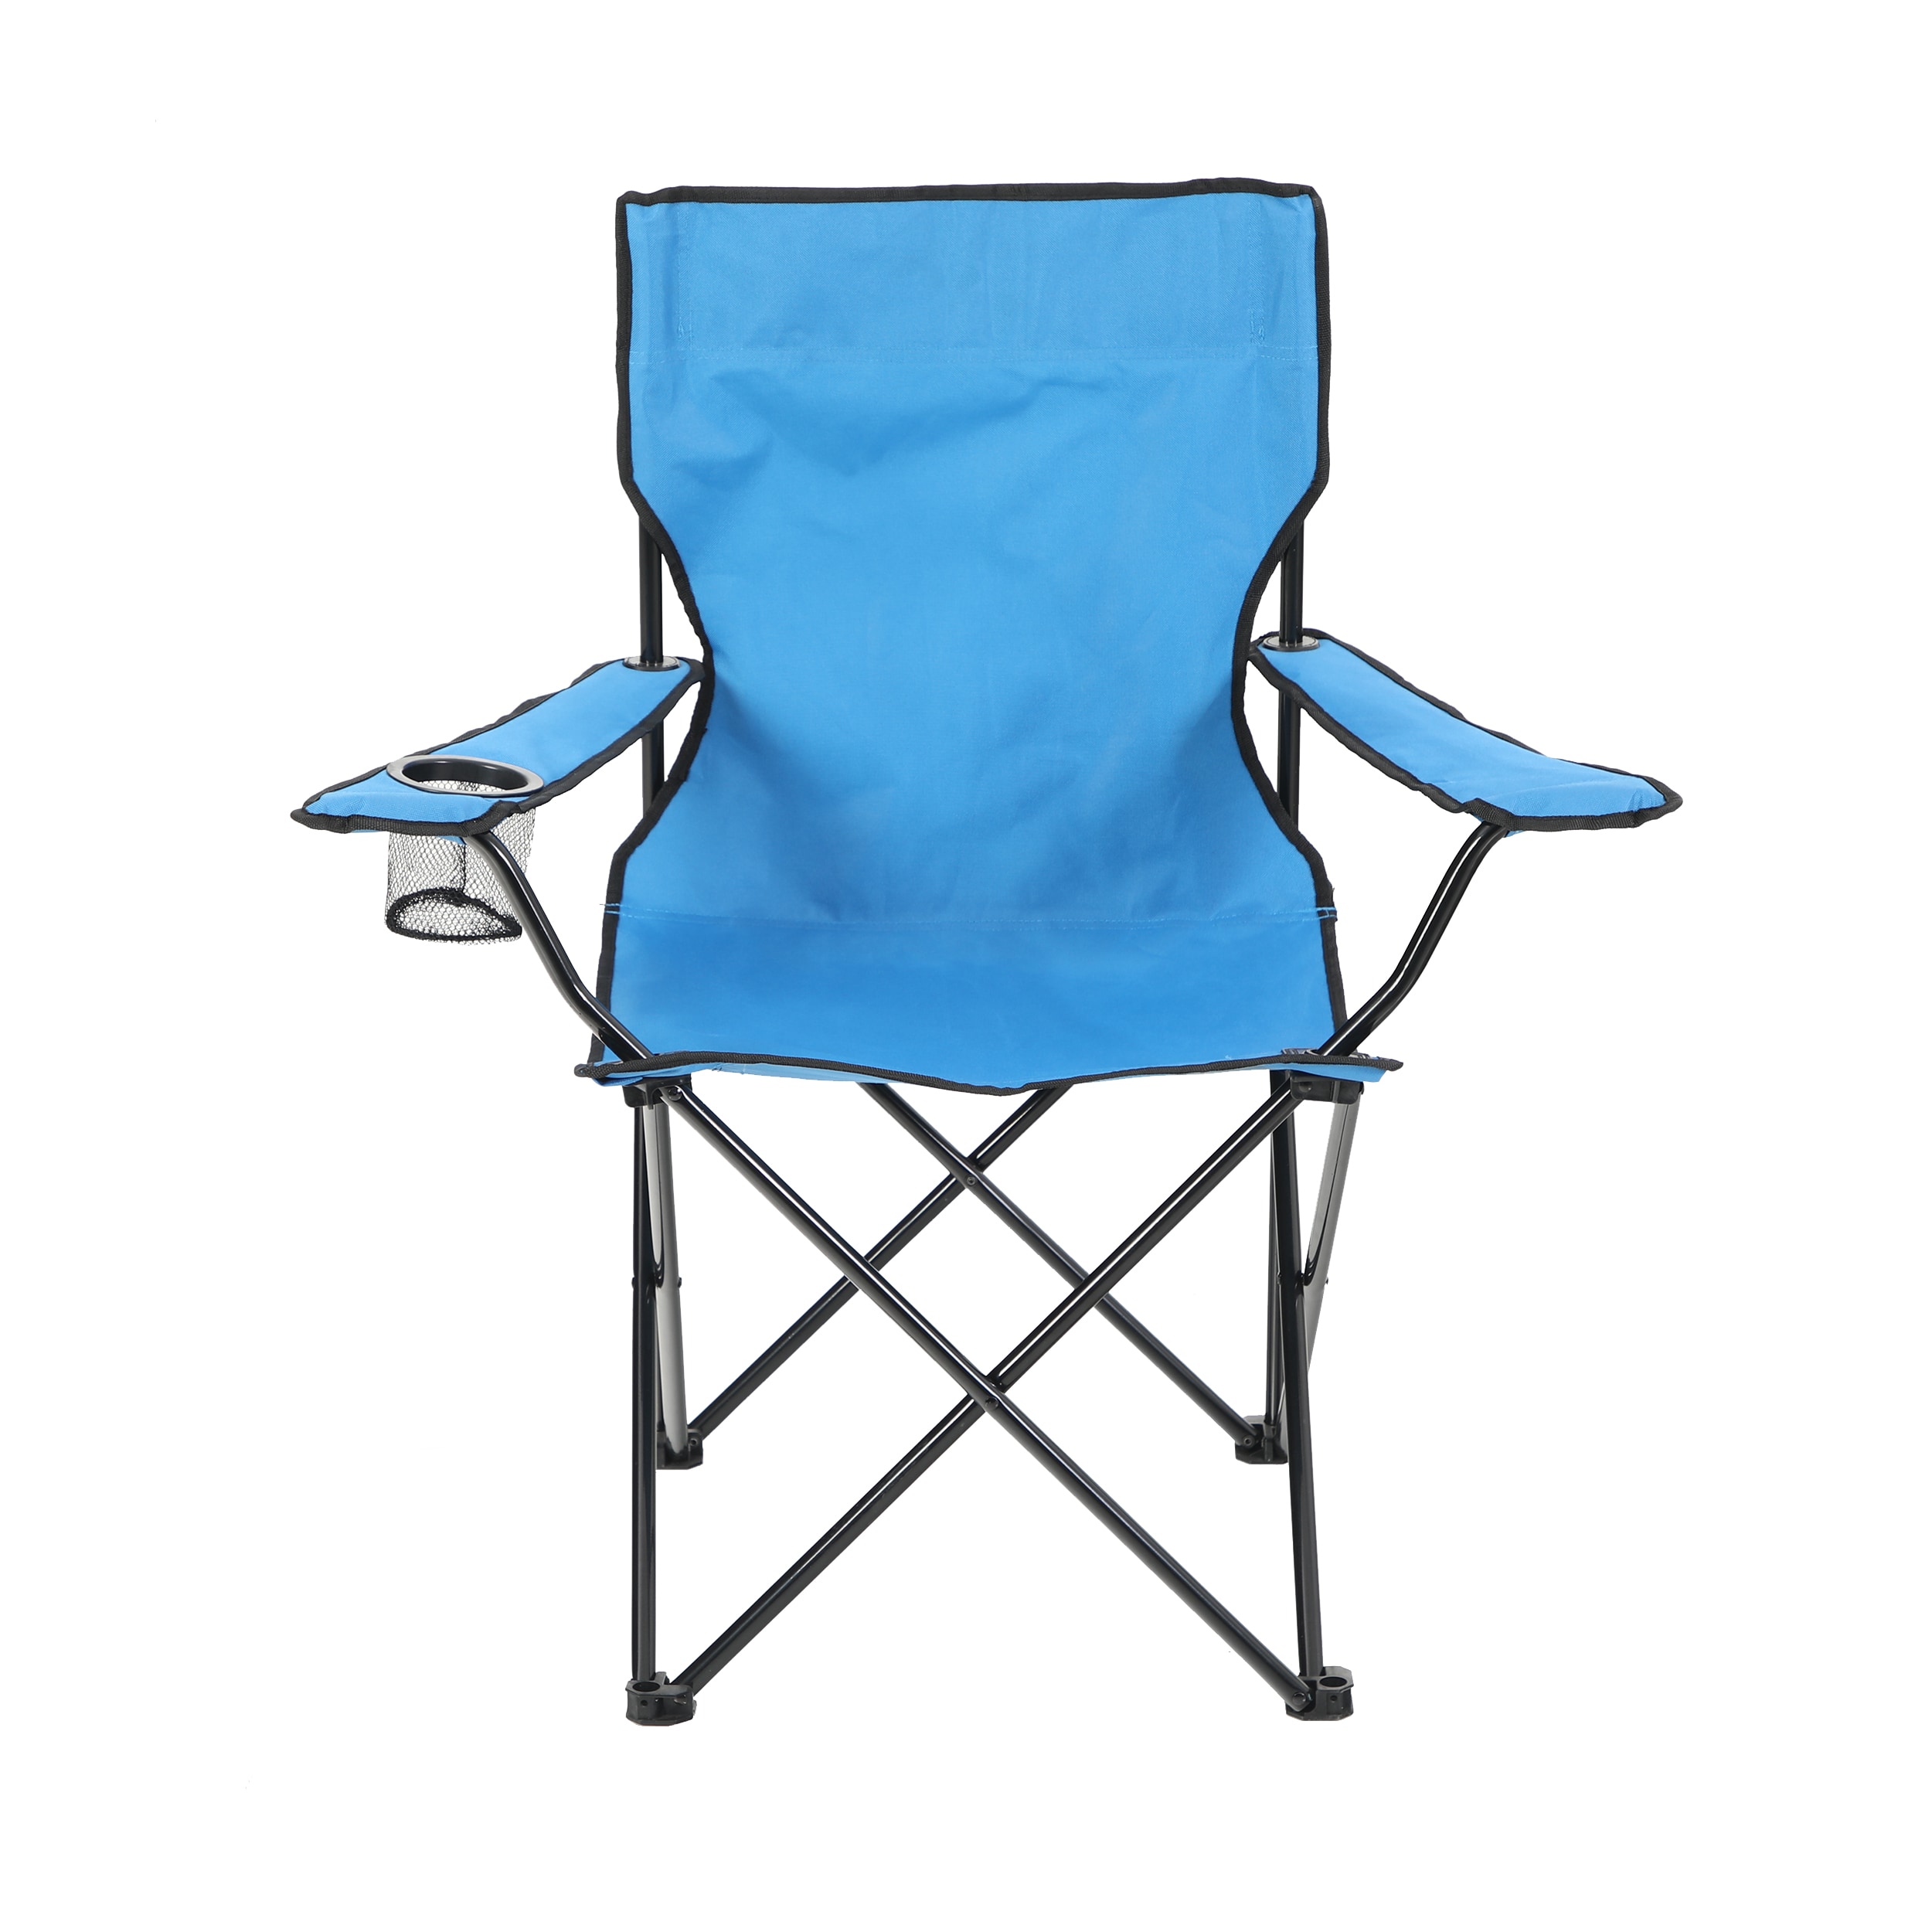 Green New Canvas Camping Fishing Foldable Collapsible Folding Chair in Blue